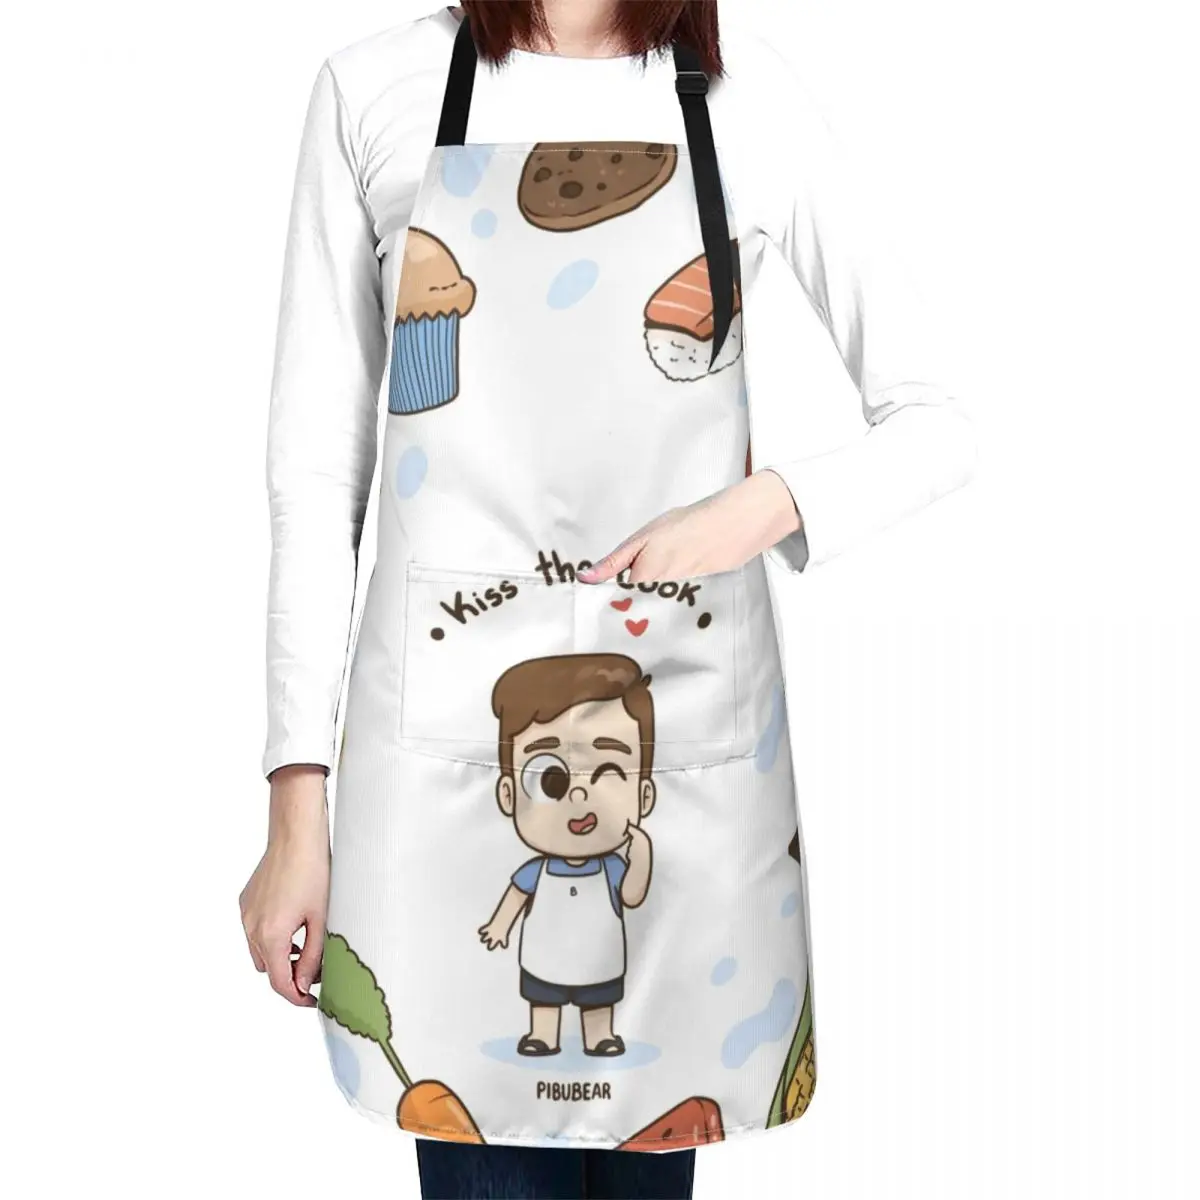 

Kiss the cook (Bu without beard) Apron Kitchen Tools Accessories work apron barber uniform